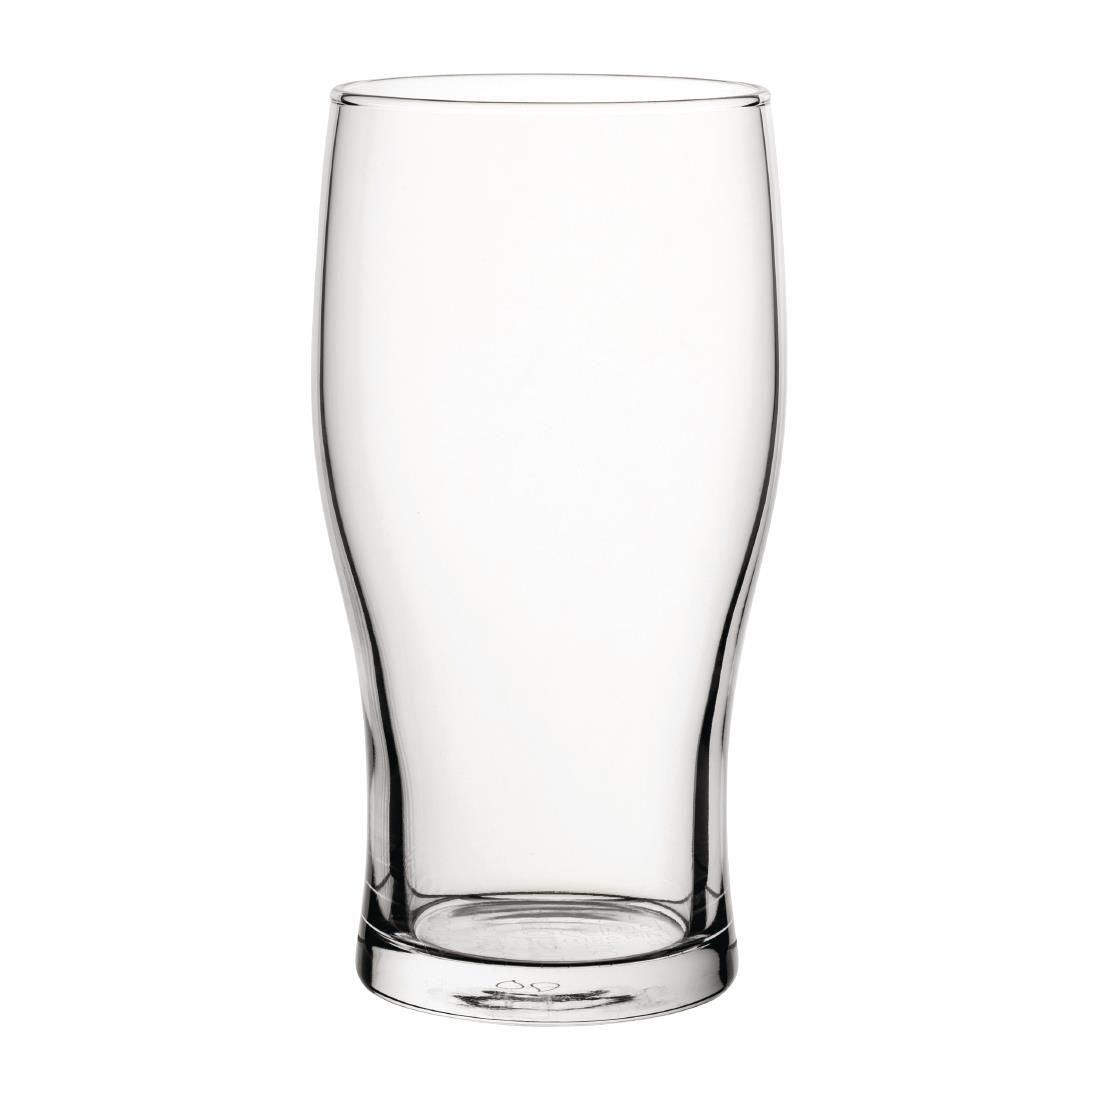 GR293 Utopia Tulip Nucleated Toughened Beer Glasses 280ml CE Marked (Pack of 48)